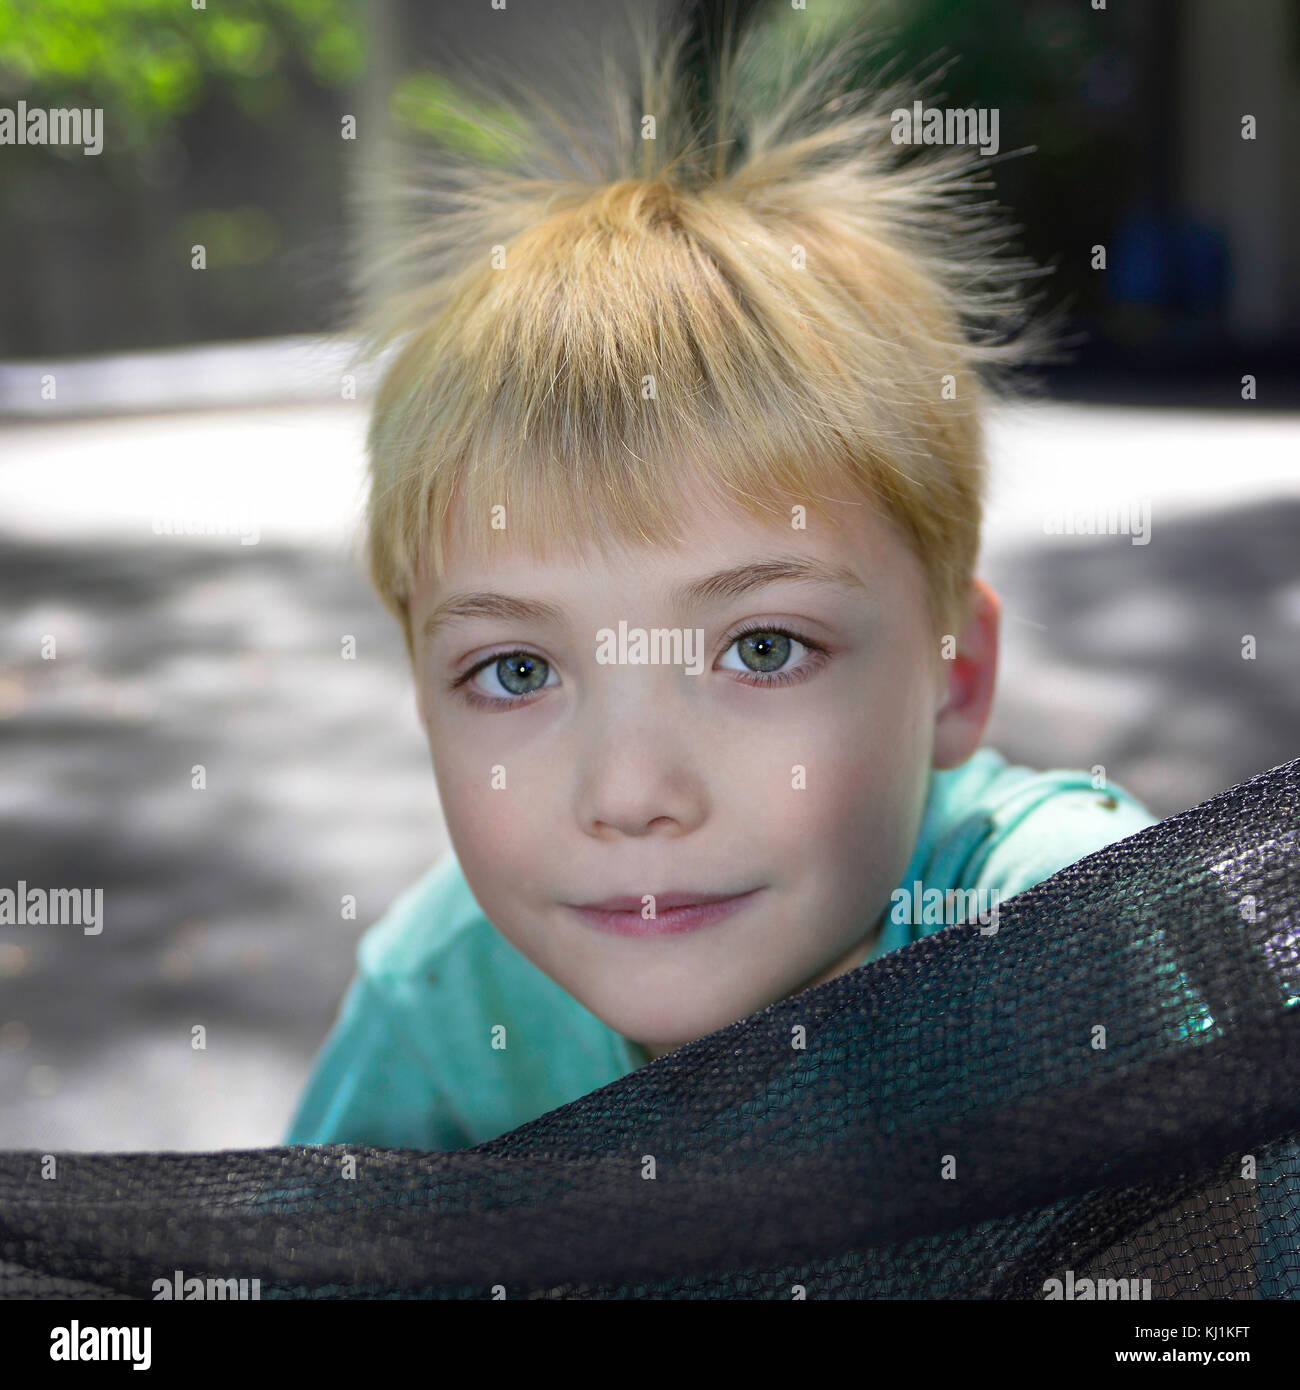 Portrait of Handsome, Young Caucasian boy with blond hair sticking up from static electricity outside on trampoline Stock Photo